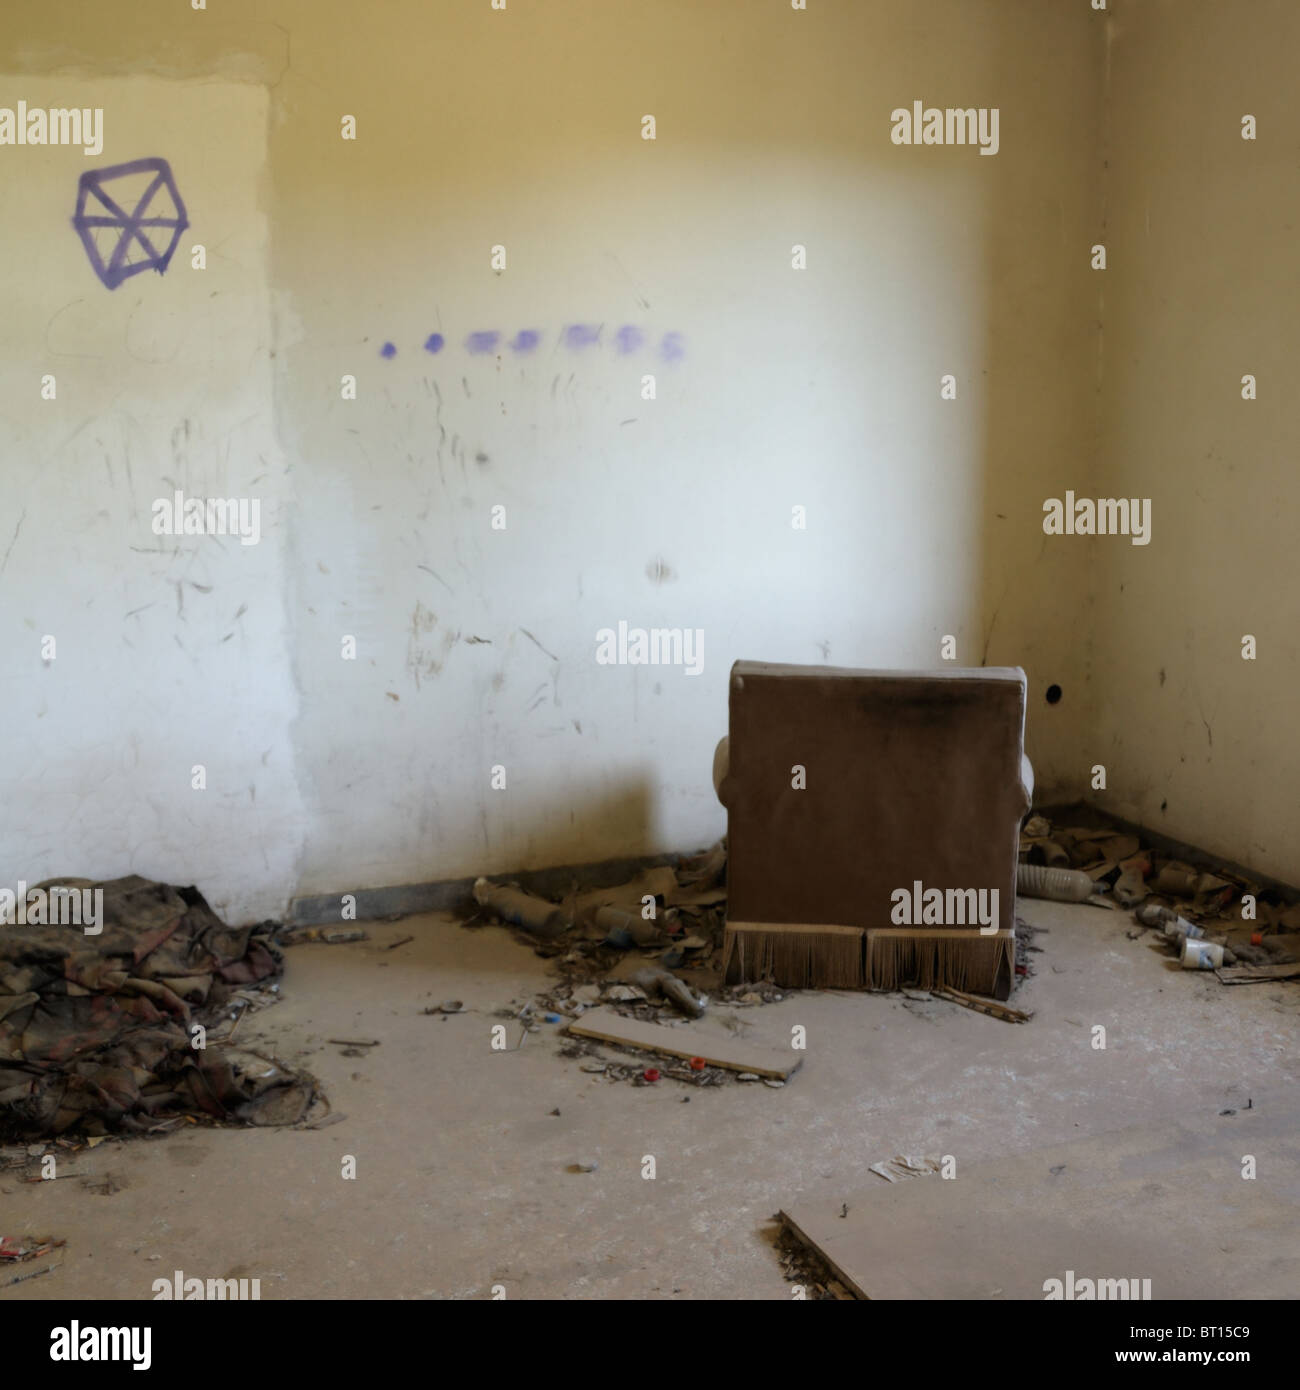 Armchair facing the wall in abandoned house. Drug use paraphernalia on the floor. Stock Photo